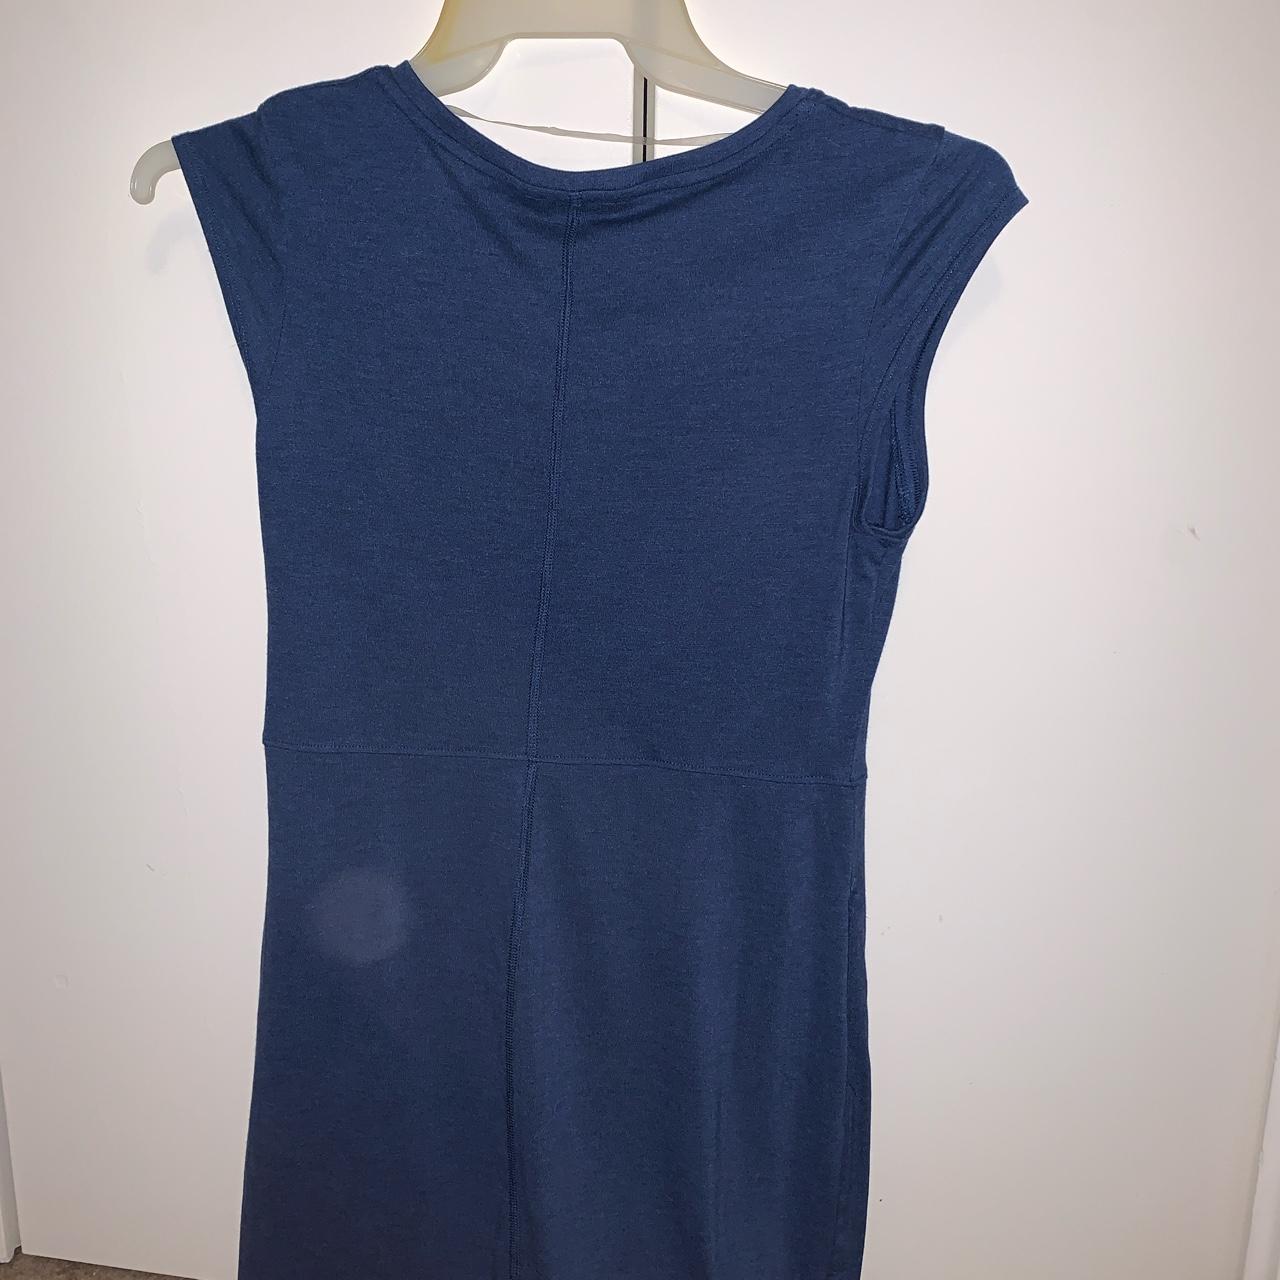 Product Image 3 - Navy Blue North Face Dress